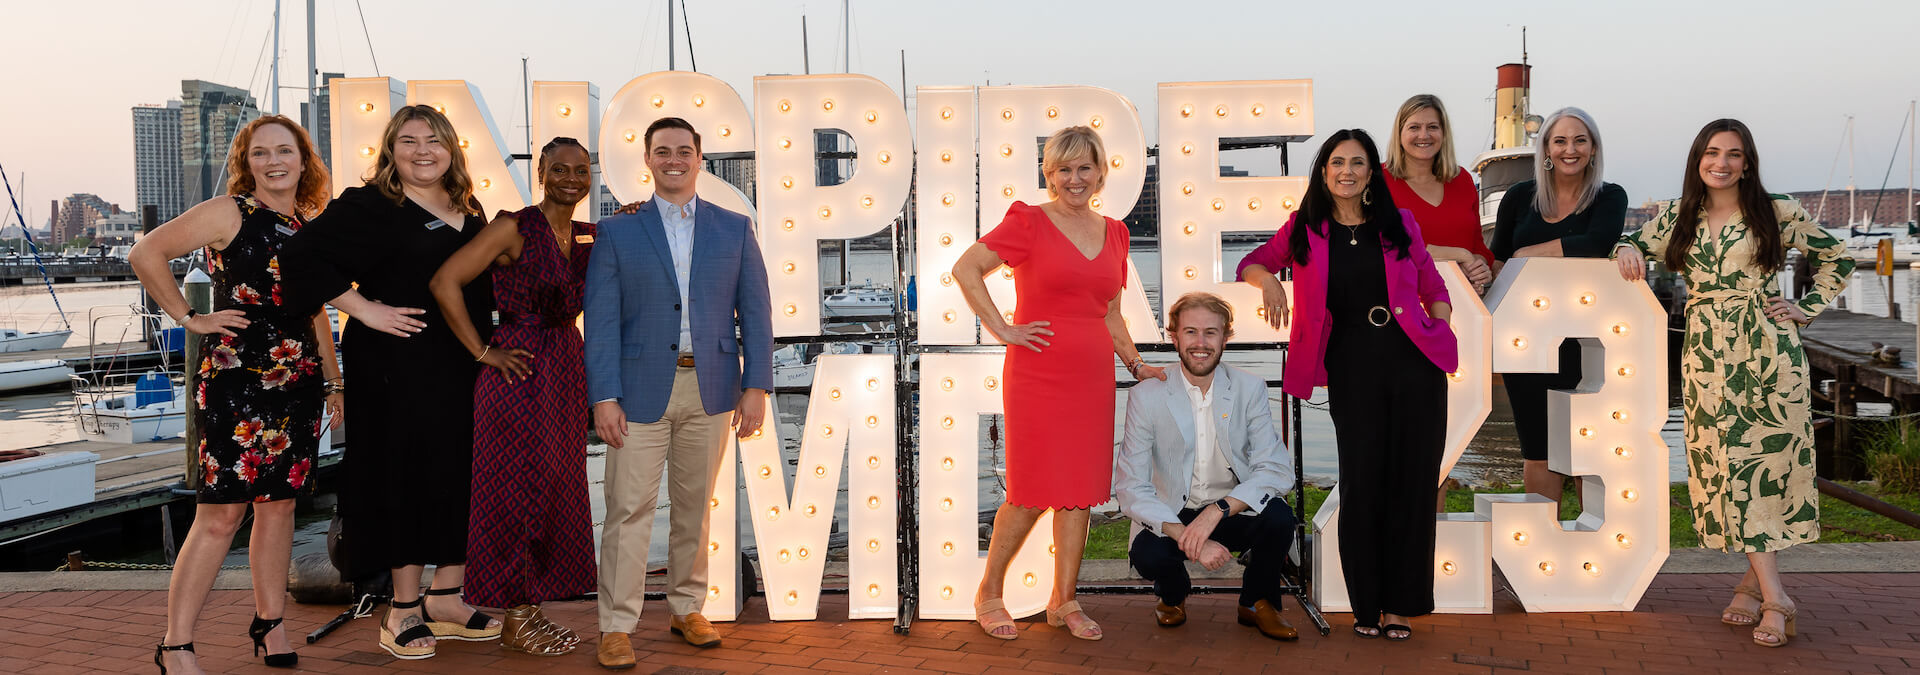 A group of 10 Maryland Chamber of Commerce staff pose in front of of a glowing, 3-D Inspire MD sign, with boats and waterfront from Baltimore's Inner Harbor in the background /